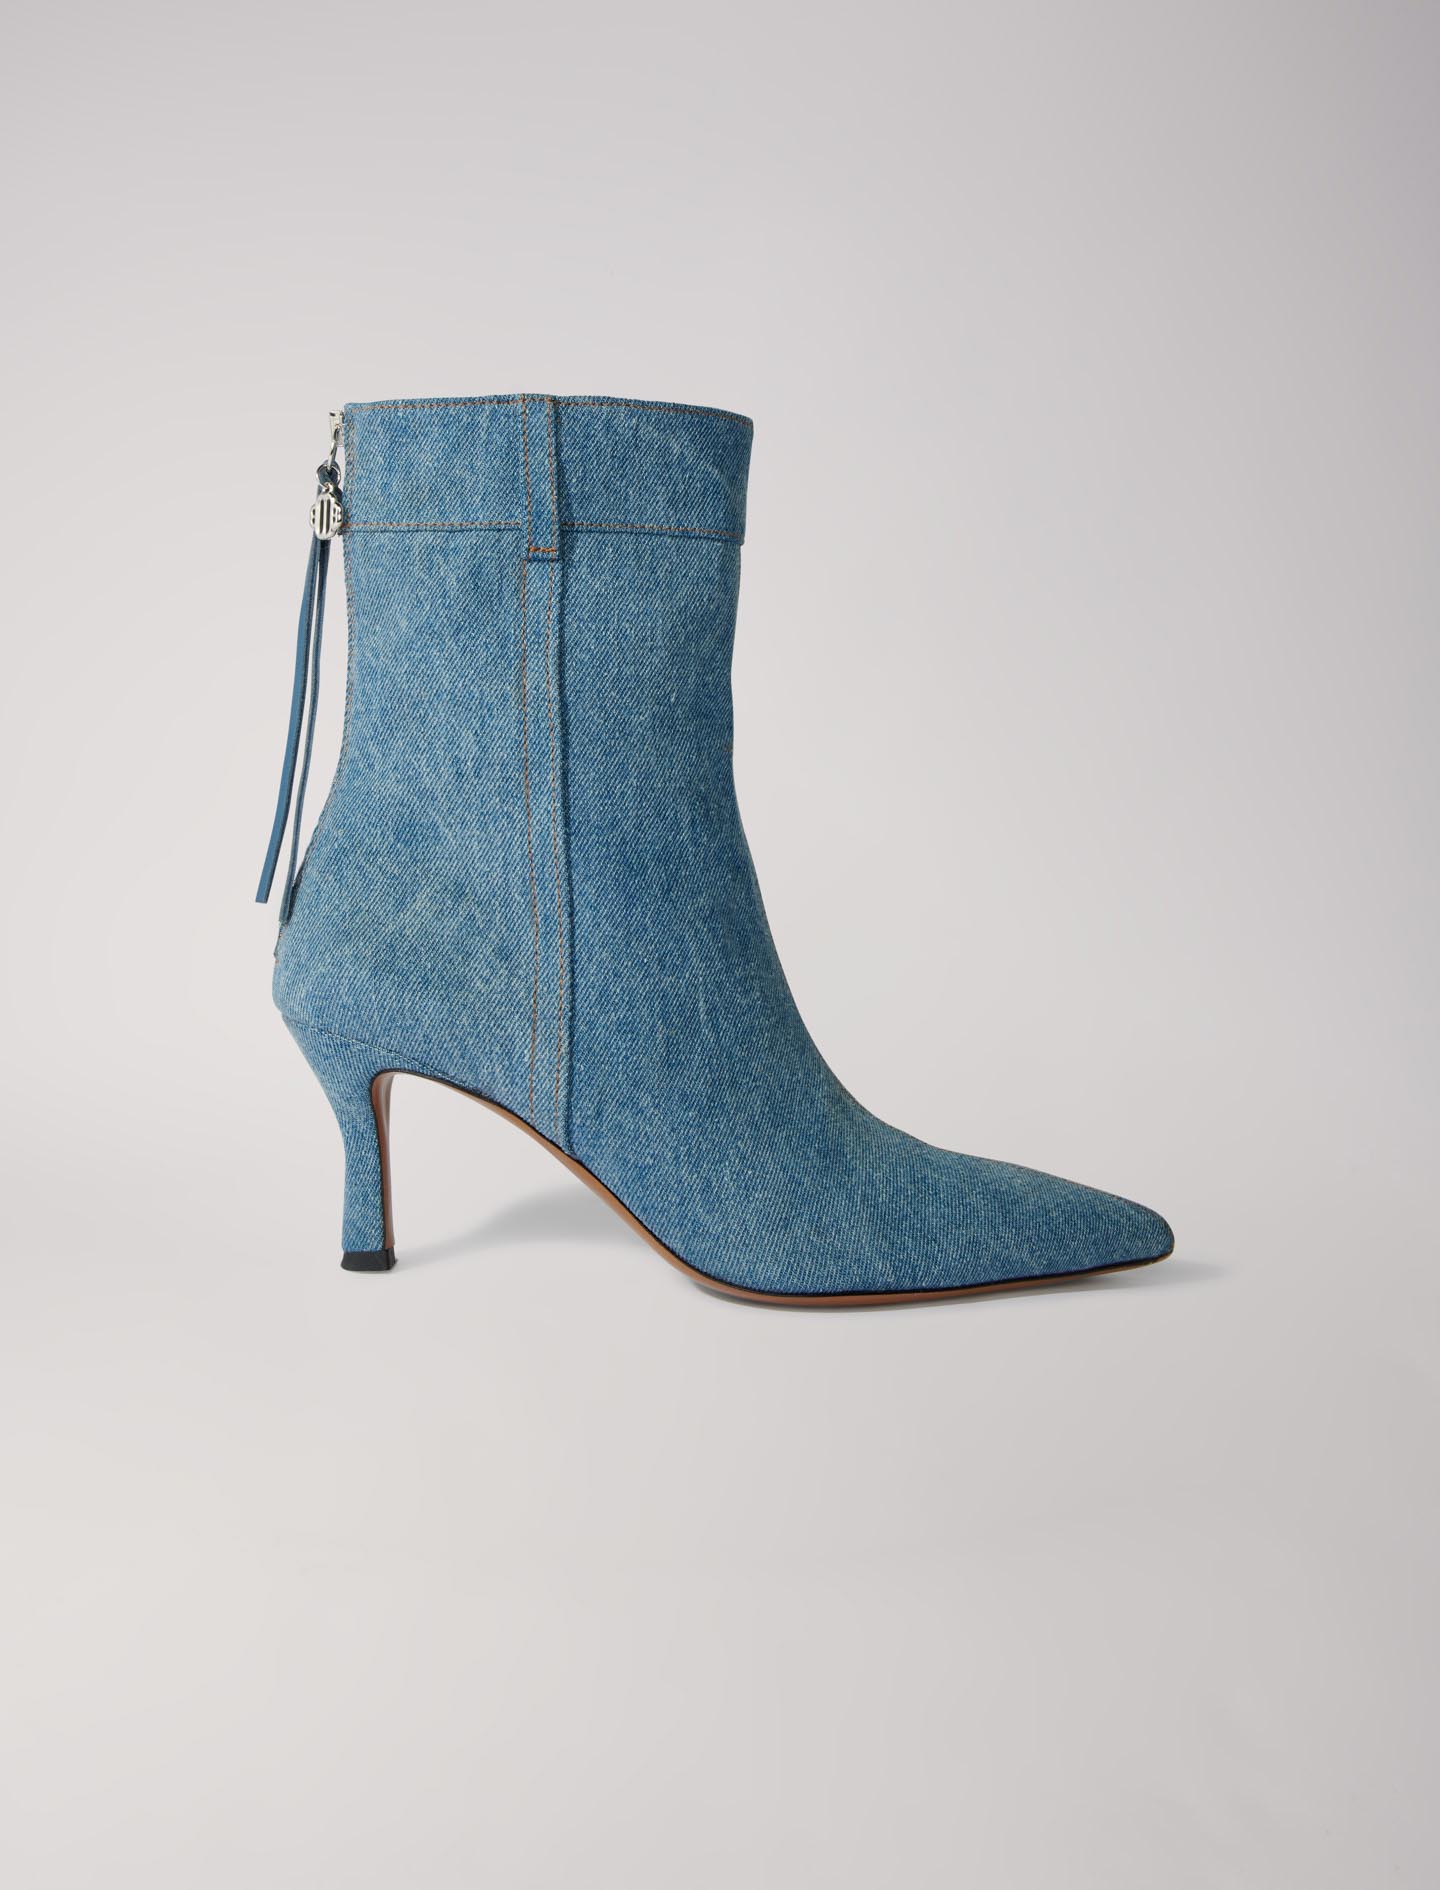 Maje Woman's goat Outer sole: Denim boots with pointed toe for Fall/Winter, in color Blue / Blue